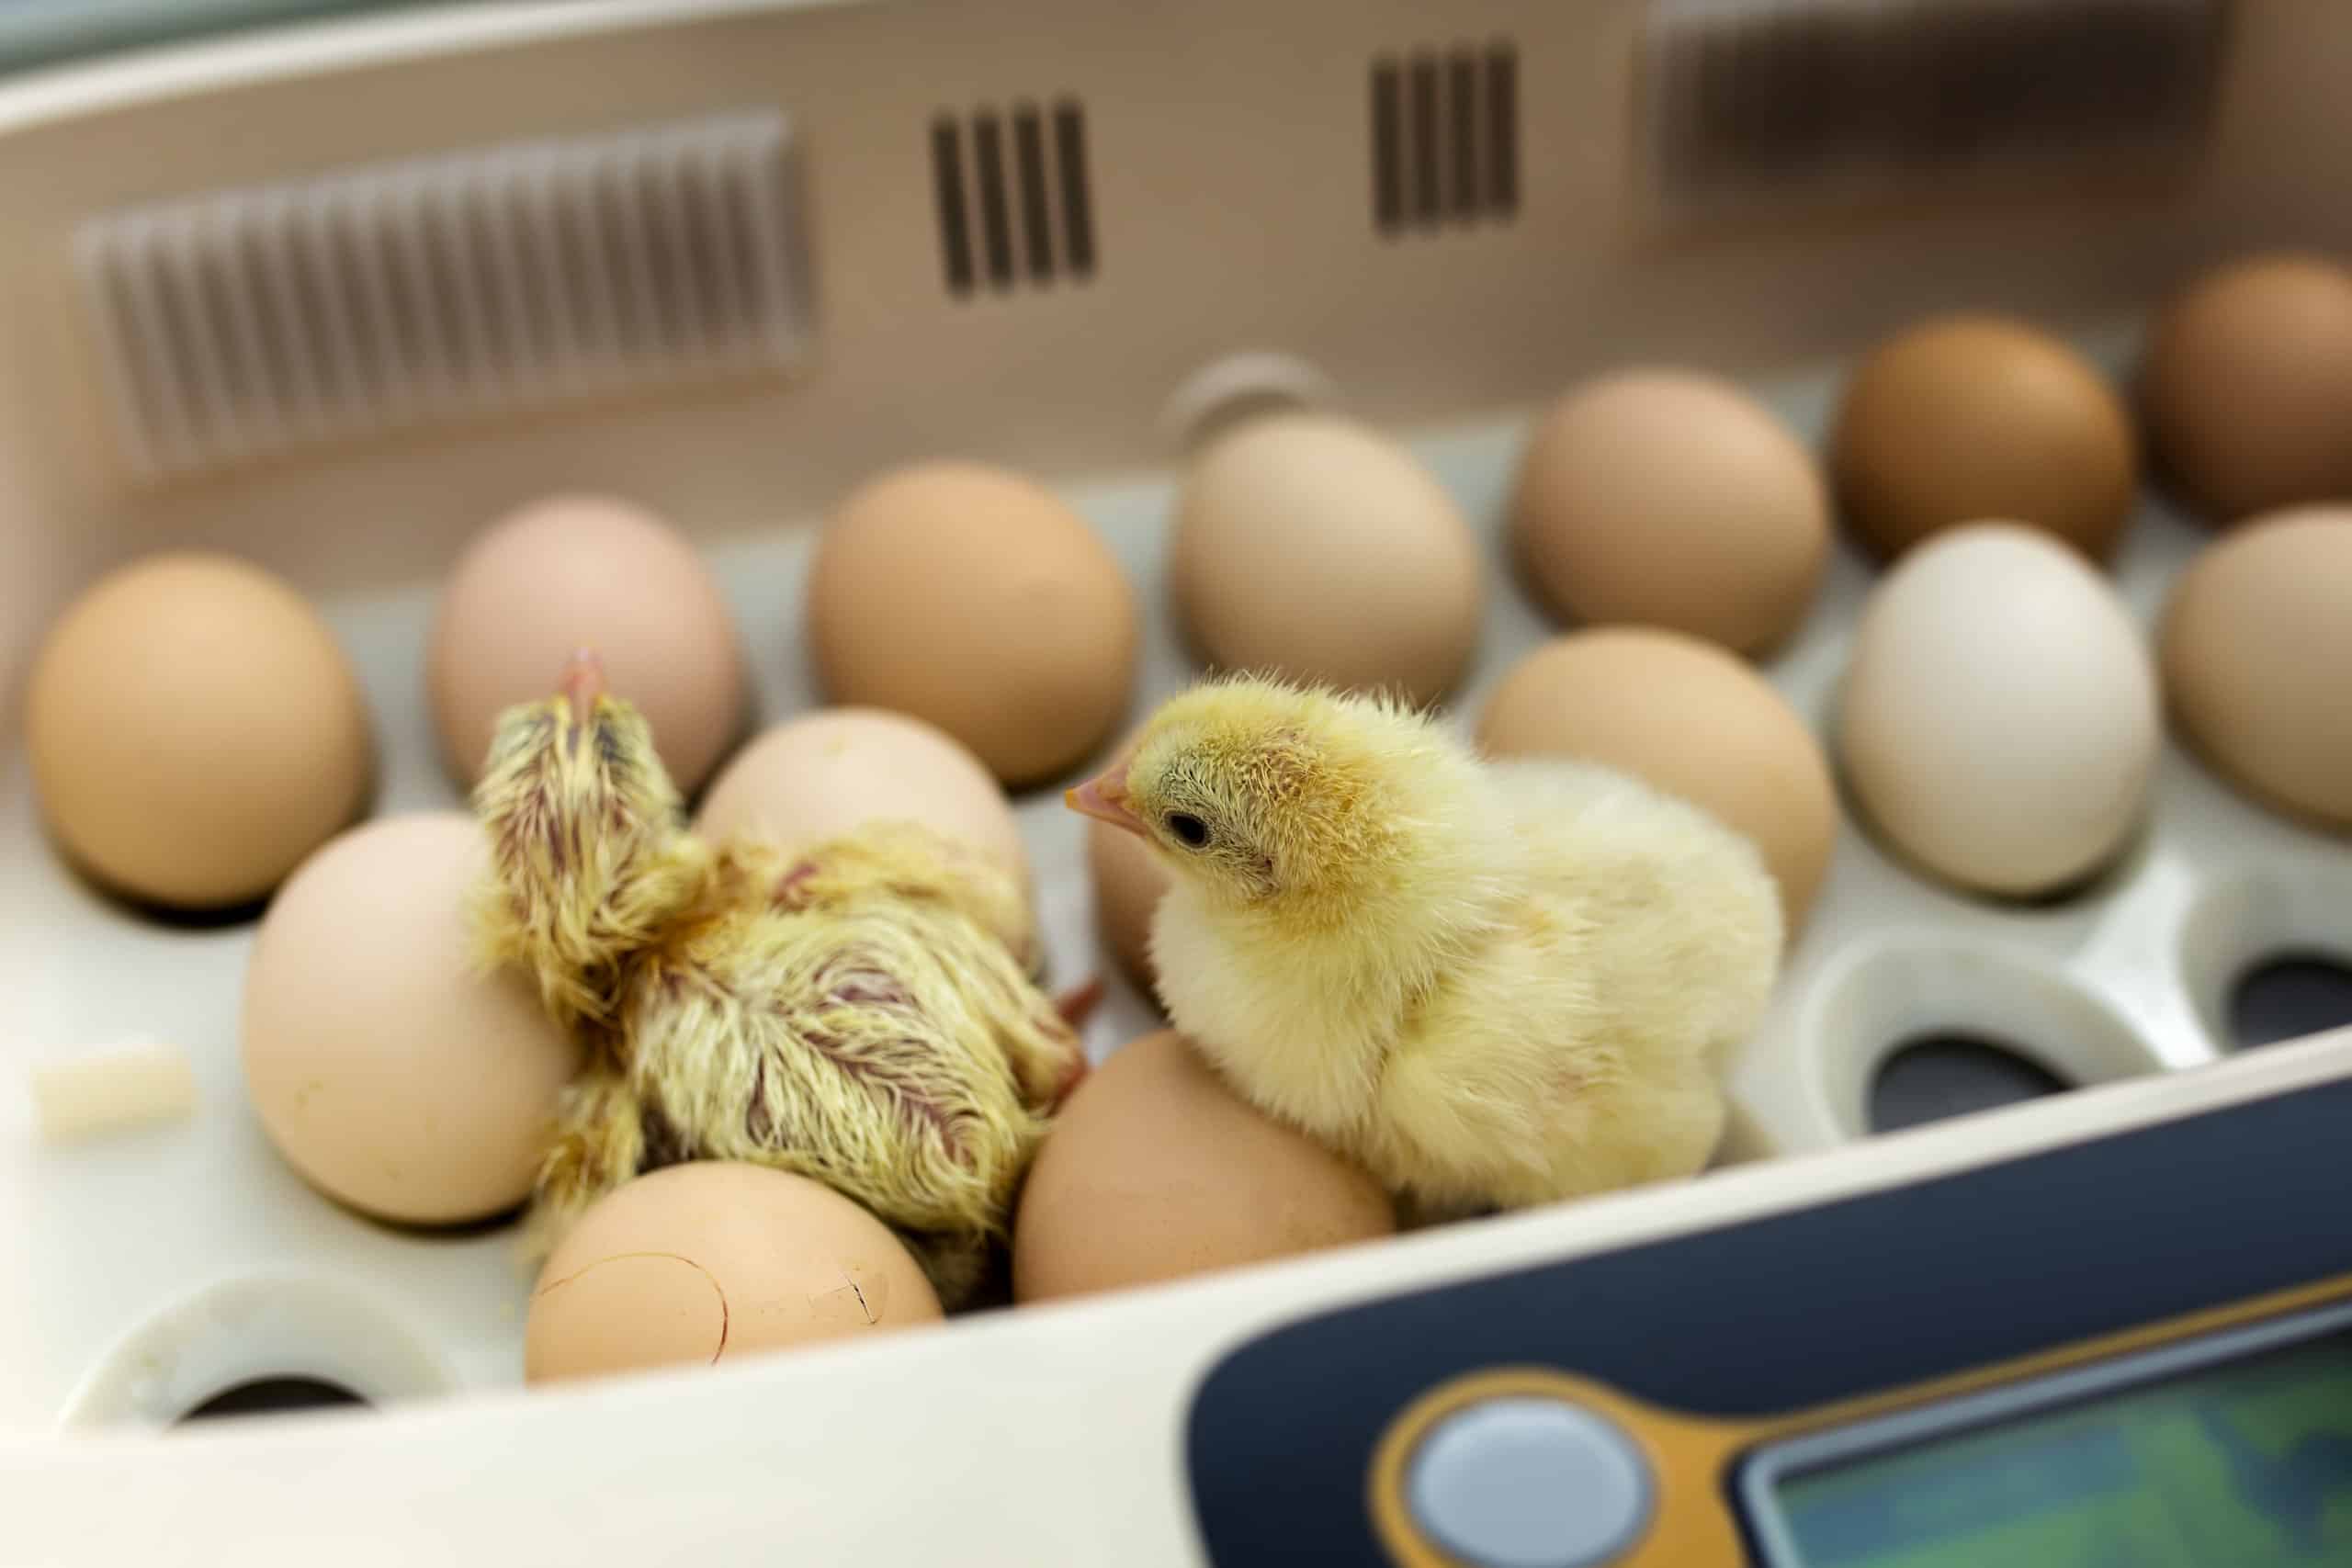 egg incubator with a baby chicken